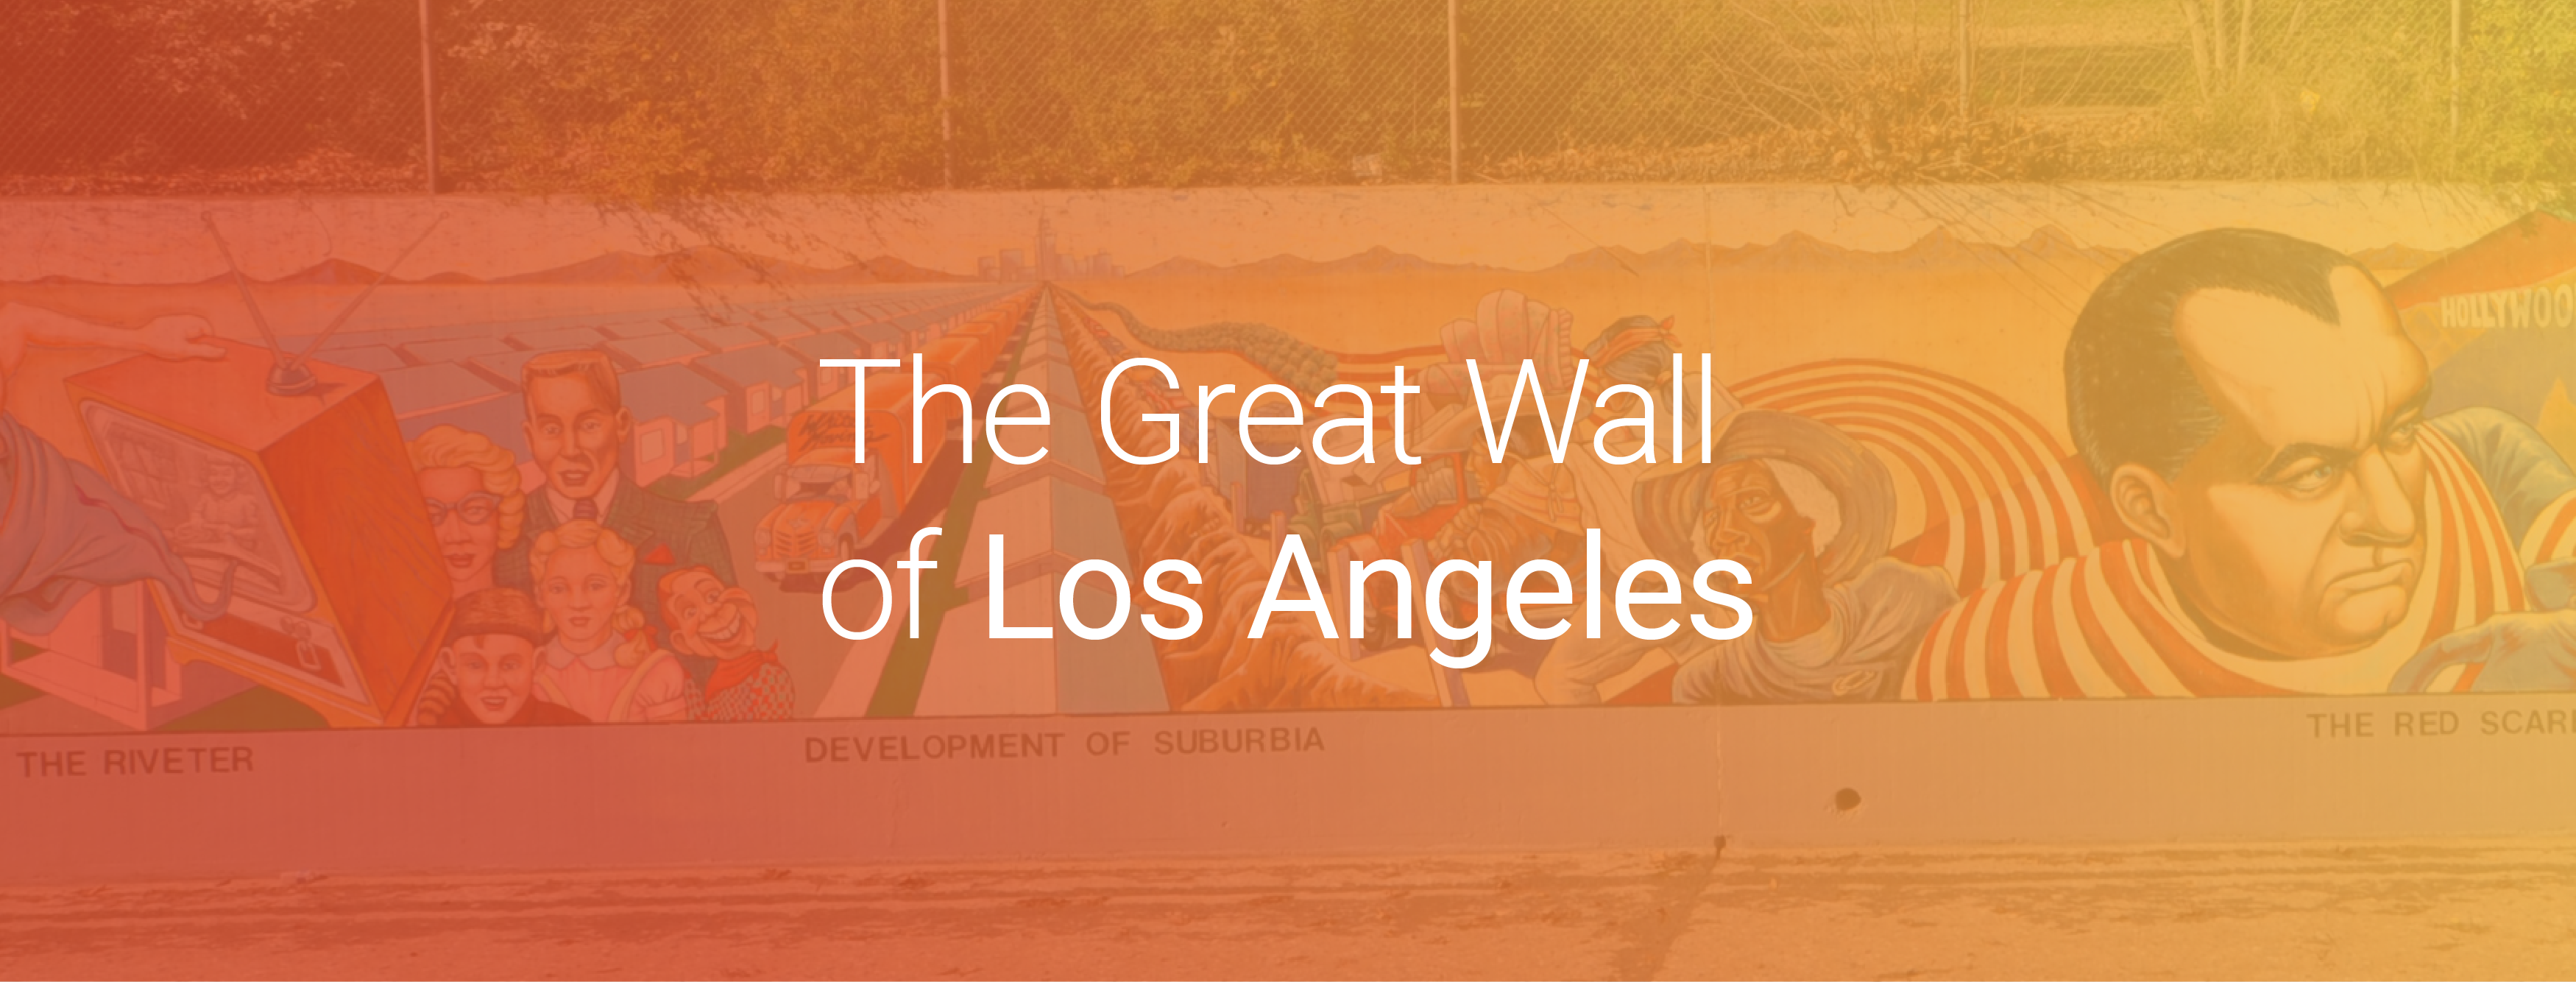 The Great Wall of Los Angeles Cover 